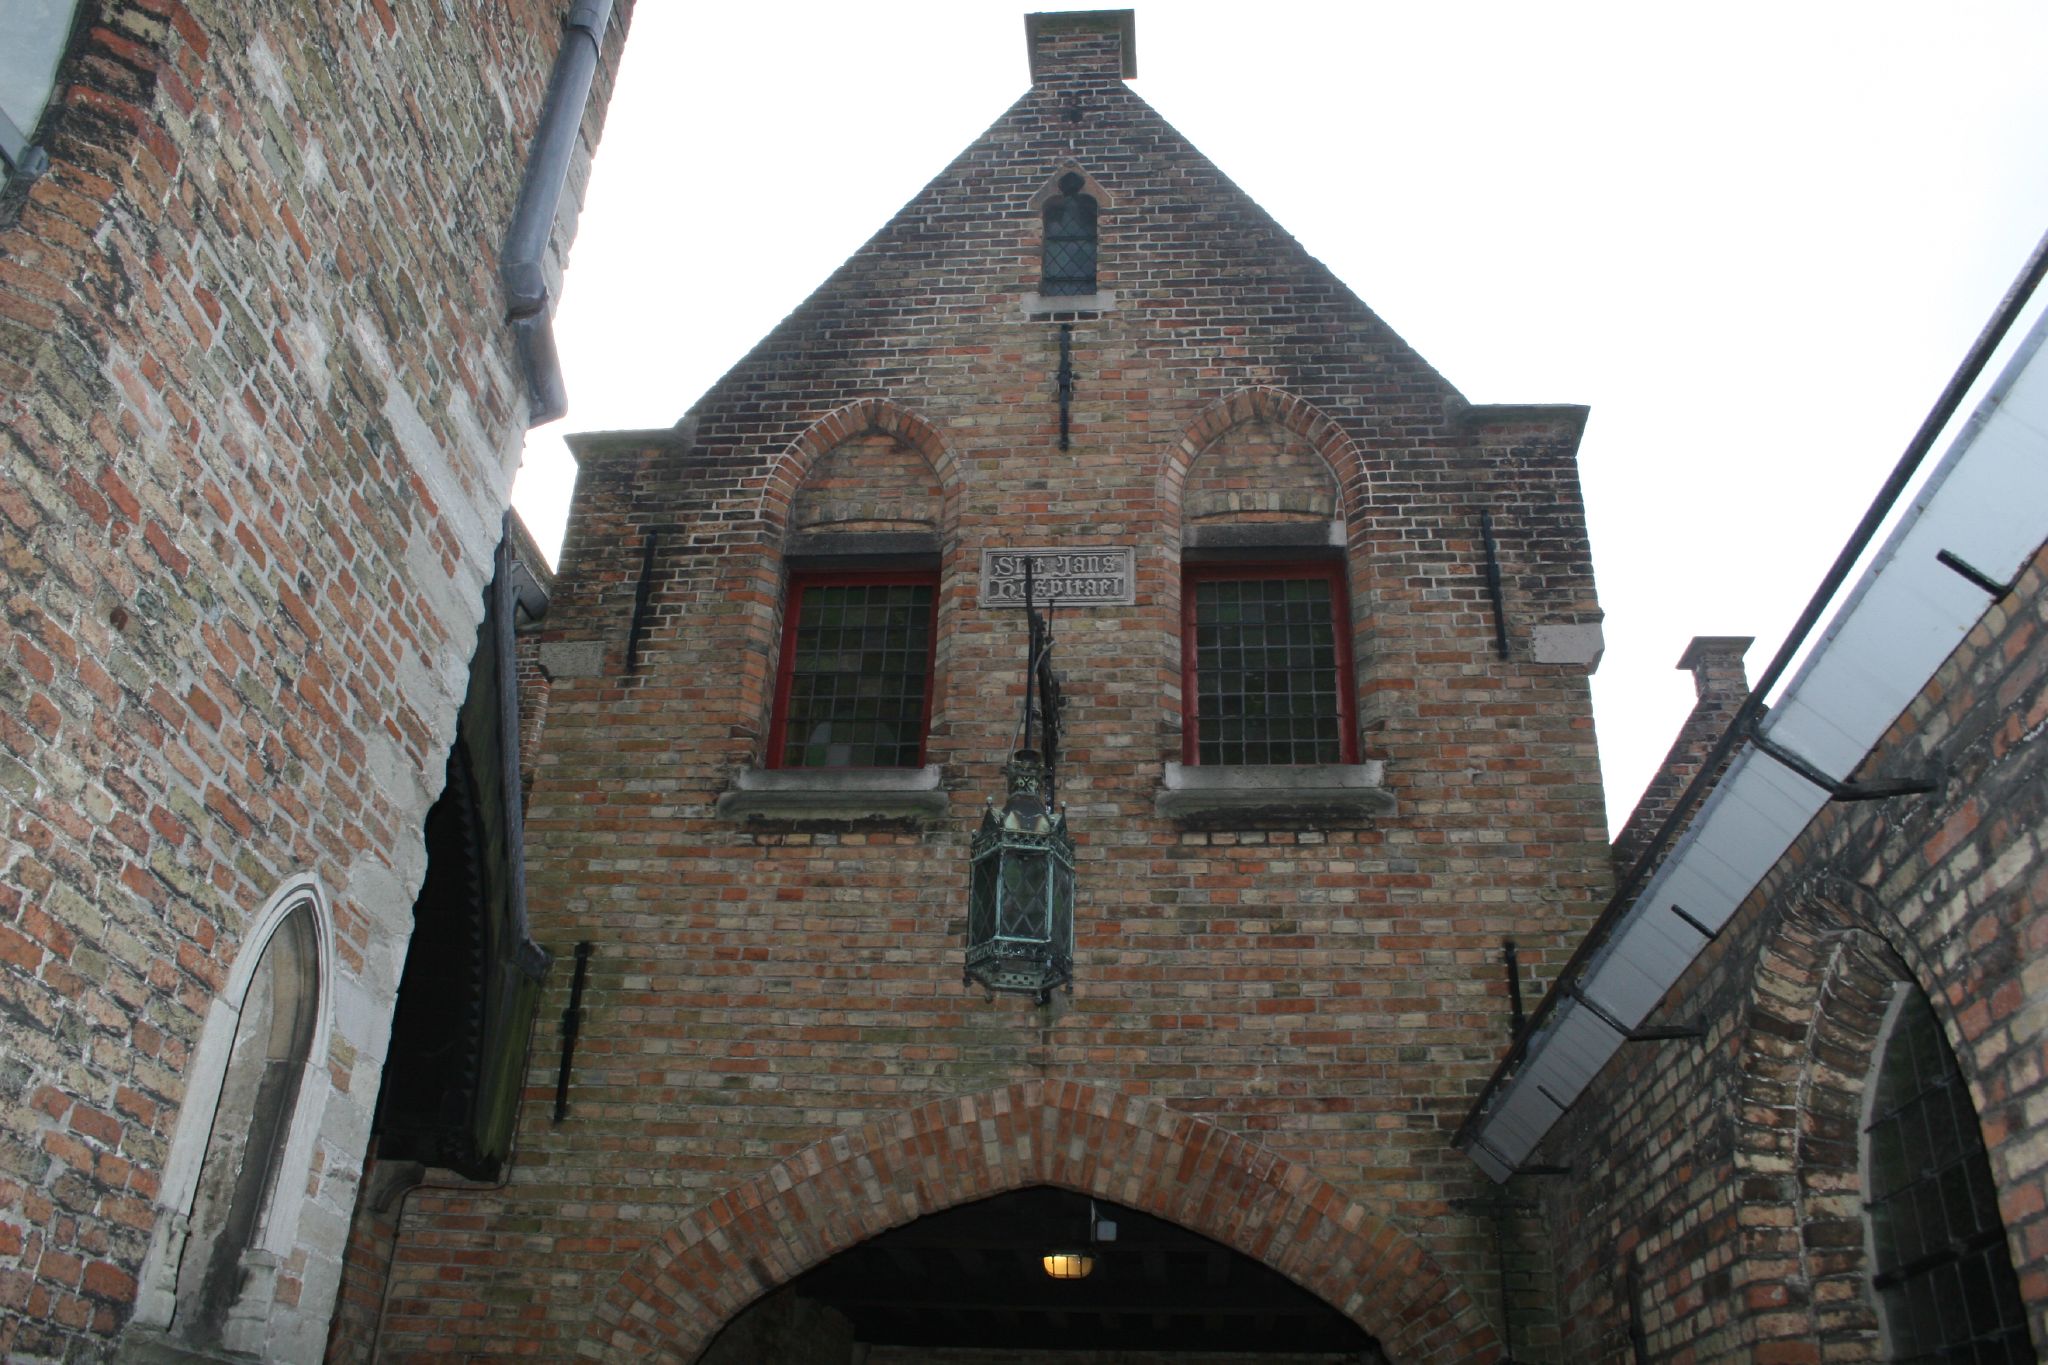 the entrance to an alley way with arched doorways